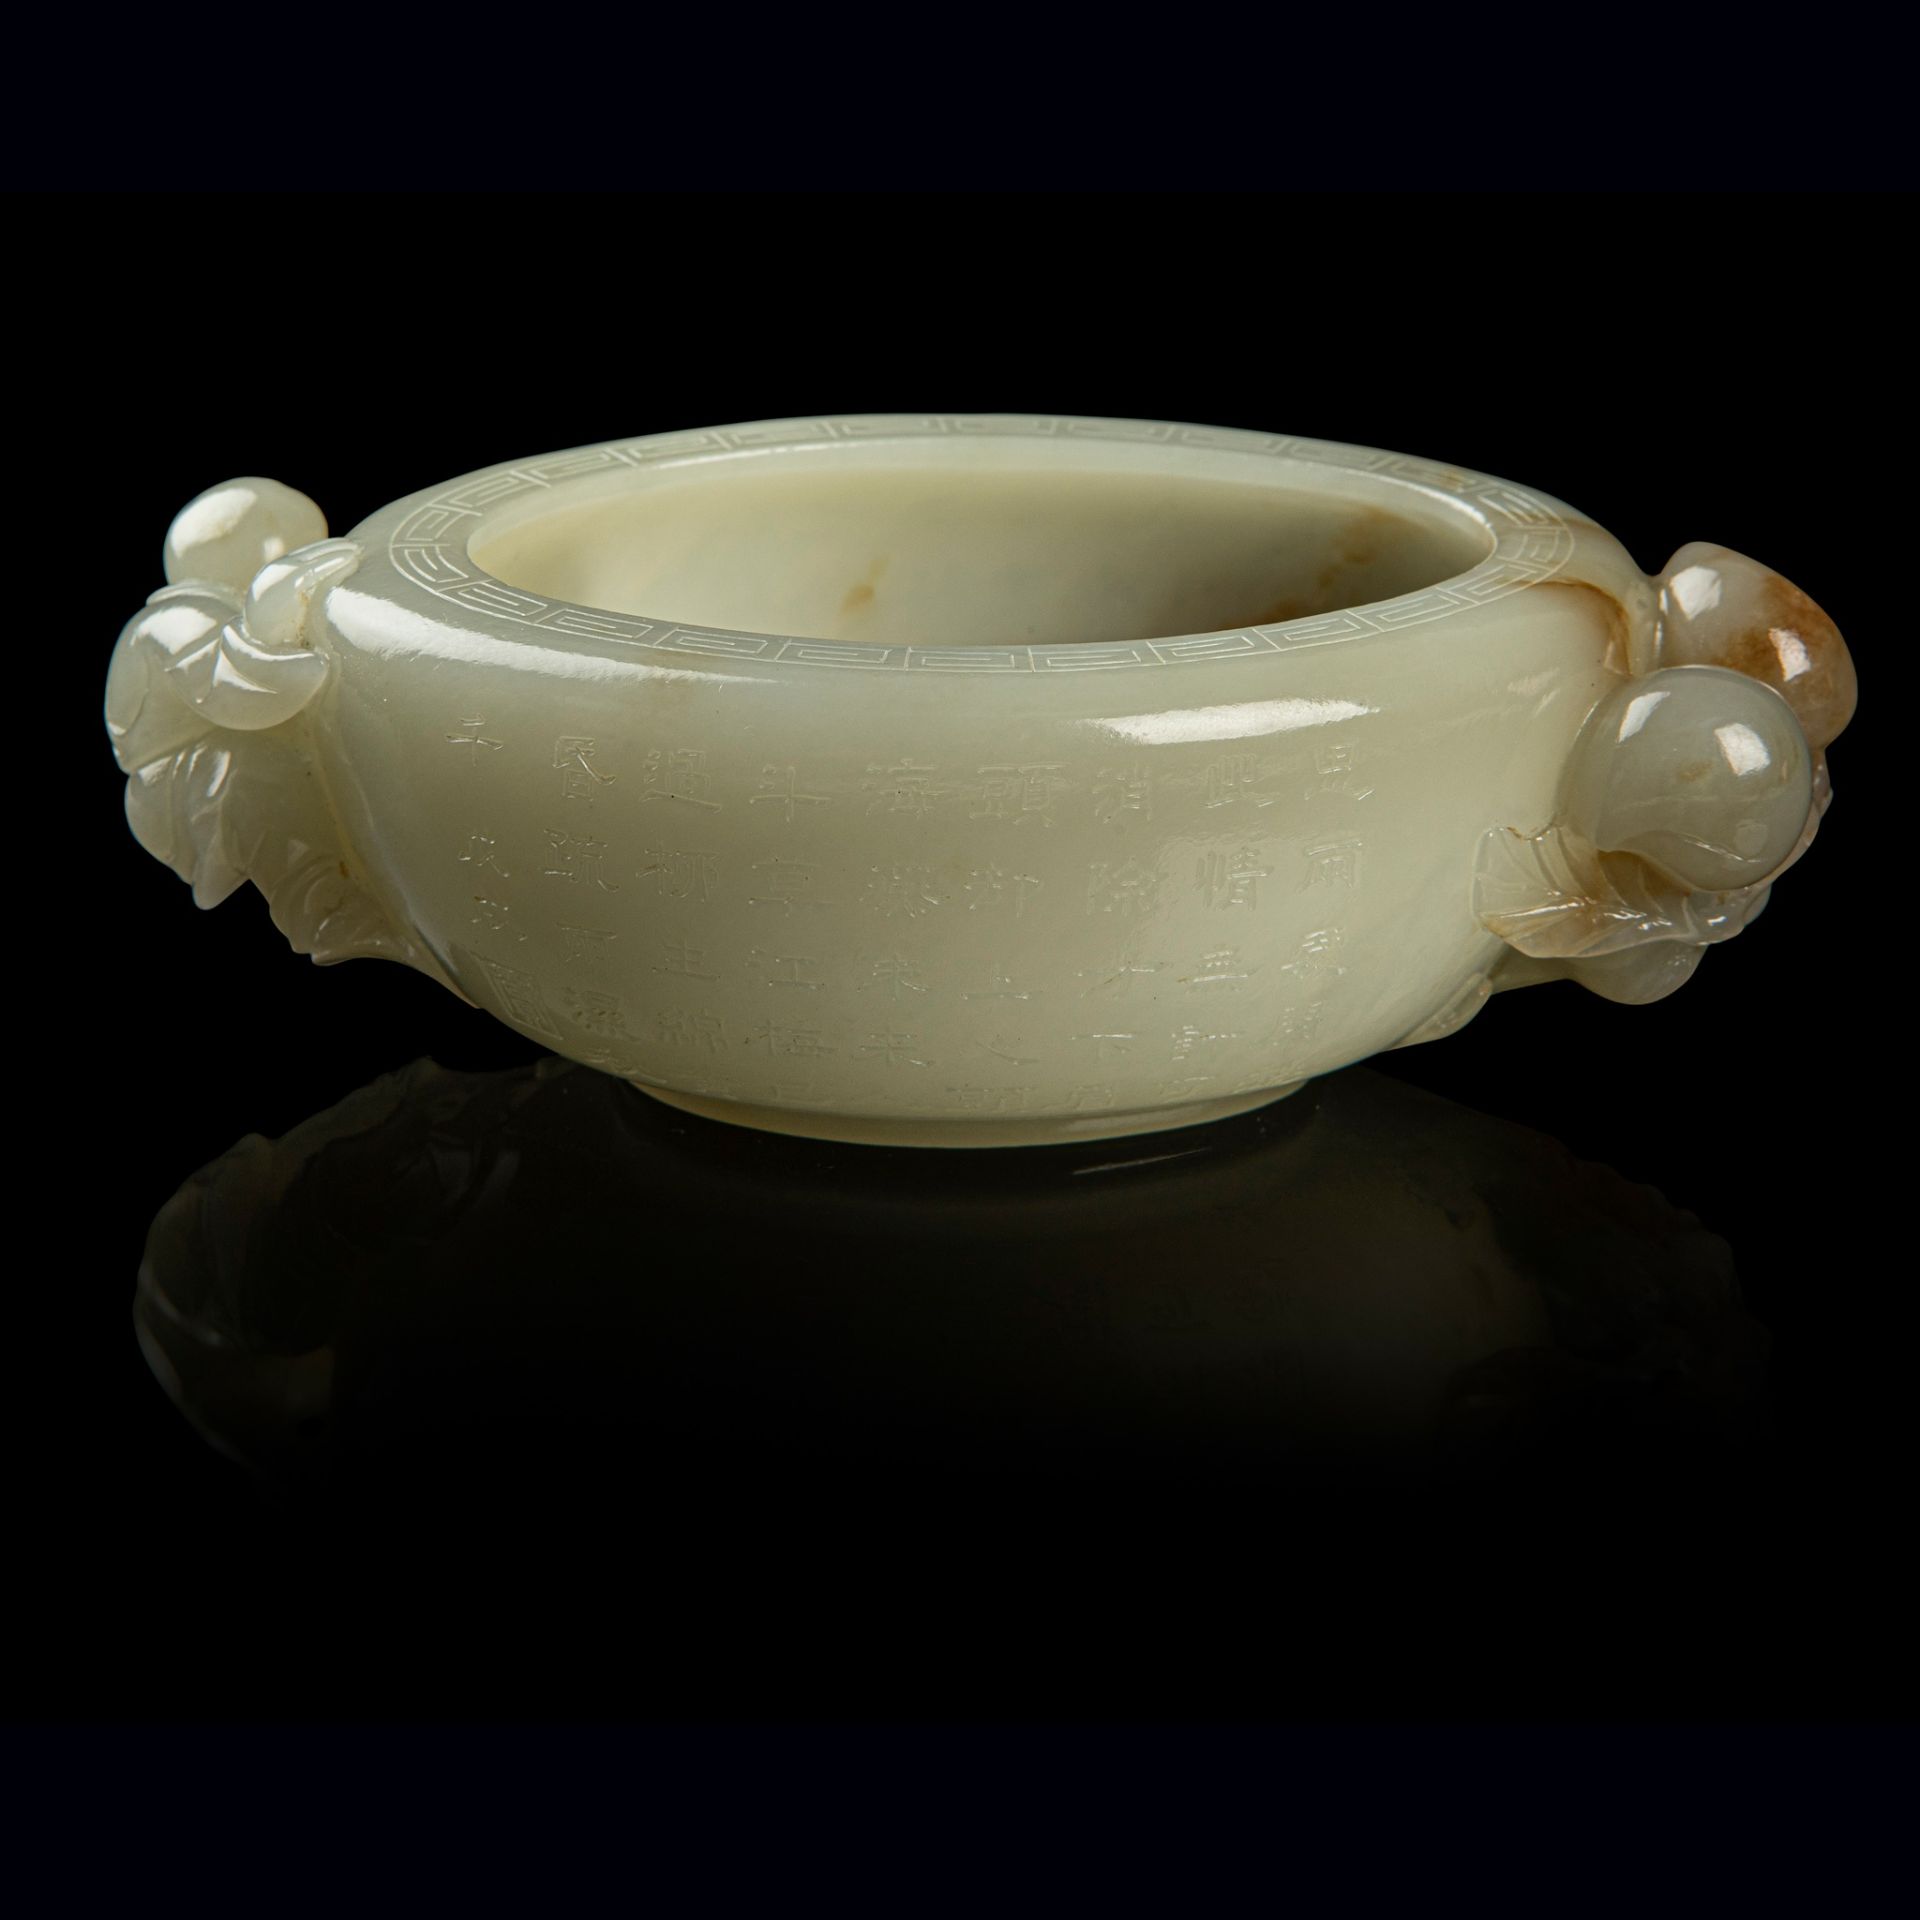 WHITE JADE OVAL WATER POT LATE QING DYNASTY-REPUBLIC PERIOD, 19TH-20TH CENTURY - Image 2 of 2